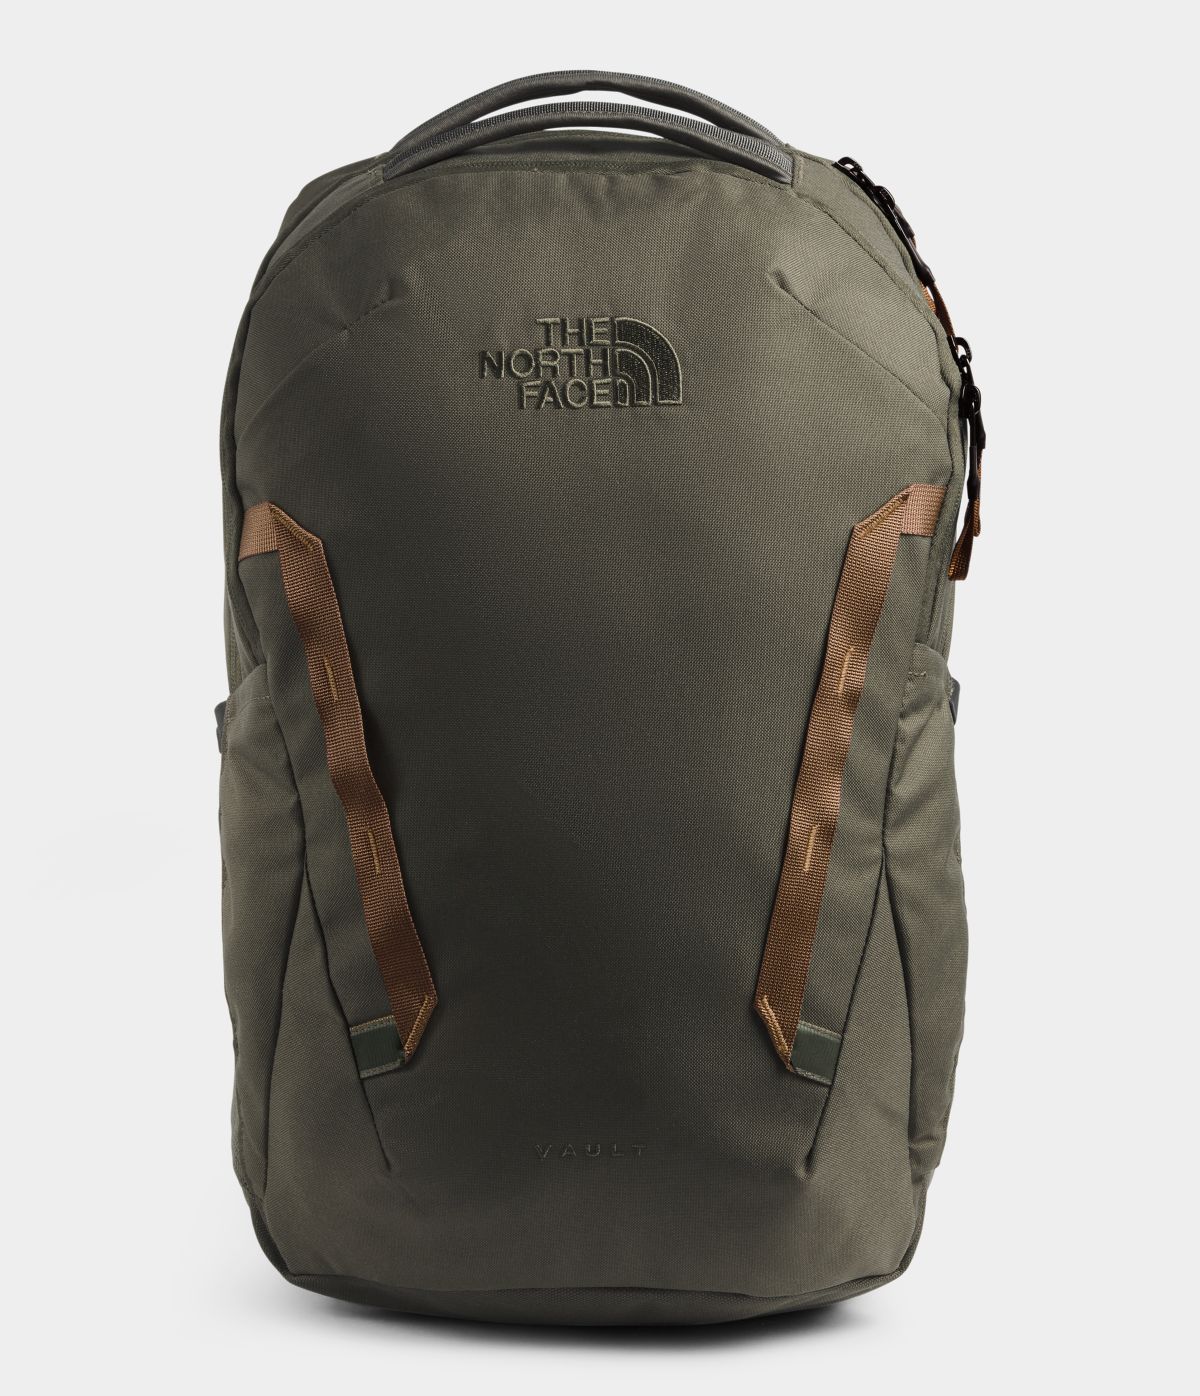 Unisex The North Face Vault Backpack in New Taupe Green/Utility Brown from front view